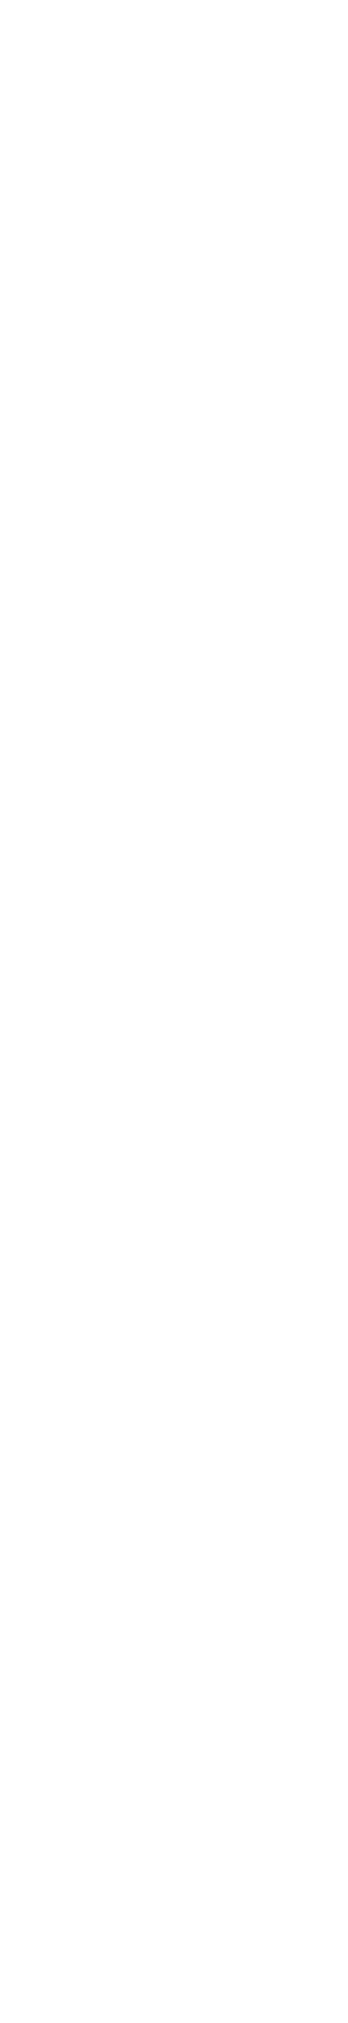  One of the key benefits of a CAT 5 networking installation is improved connectivity. With a network installed in your home, you can easily connect multiple devices to the internet without having to rely on individual connections. This can improve the overall speed and quality of your internet connection, and provide a more seamless browsing experience. Another benefit of a home networking installation is increased convenience. With a network installed, you can access the internet from anywhere in your home, and easily share files and data between devices. This can make it easier to work from home, stream media, and access online services. A CAT 5 networking installation can also be a cost-effective solution for your communication needs. By centralizing your internet connection, you can potentially save money on individual connections, and enjoy a more efficient and streamlined setup. Overall, a CAT 5 networking installation by Gloucester WiFi in Gloucester can provide improved connectivity, convenience, and cost-effectiveness for homeowners. With Gloucester WiFi 's expertise and dedication to customer satisfaction, you can have confidence that your networking installation is in good hands. Contact us today to learn more about how we can help you achieve your communication needs.